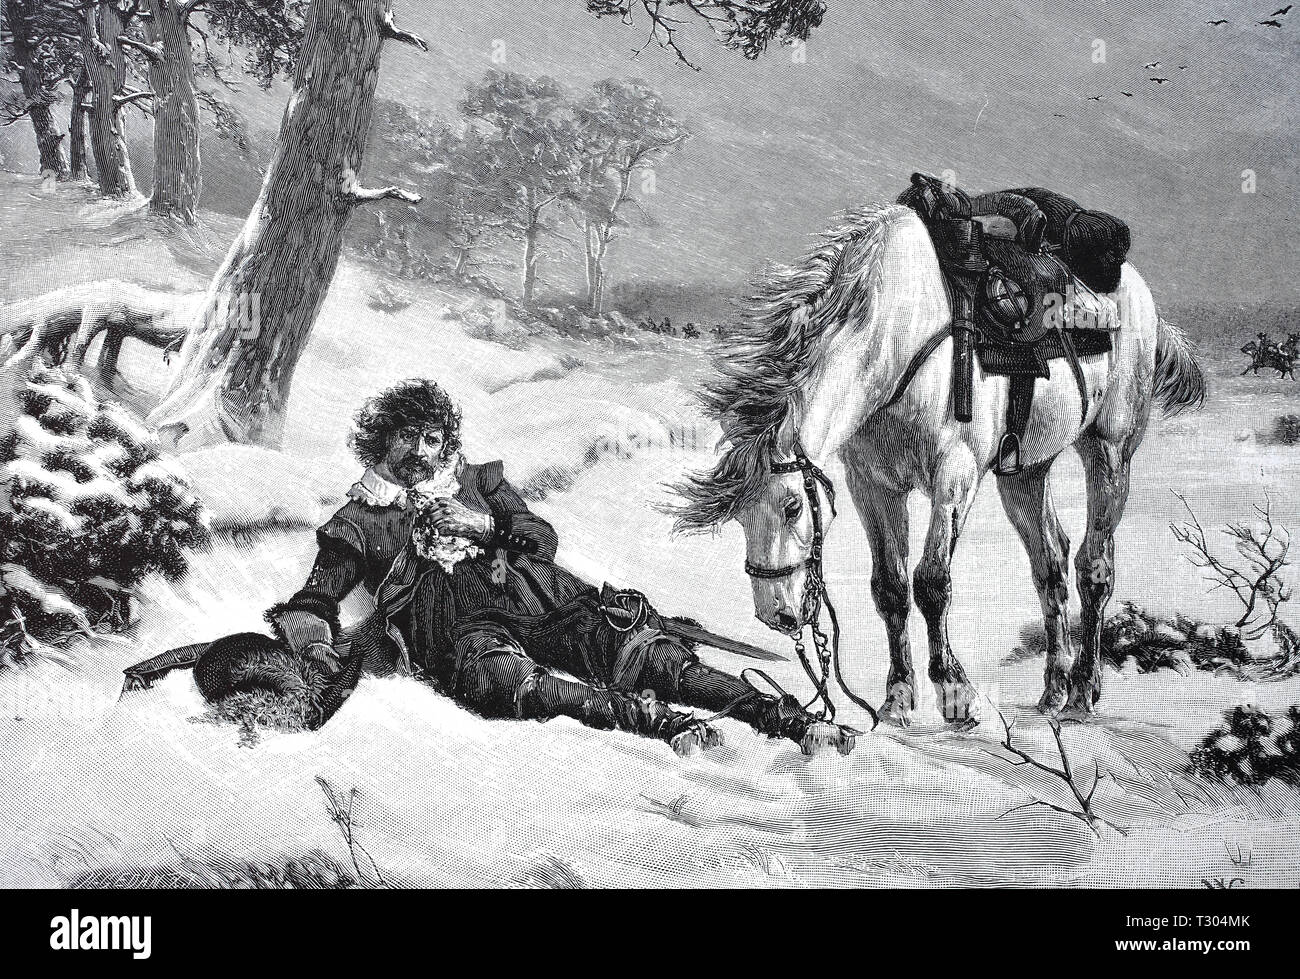 Digital improved reproduction, After lost battle, seriously injured from the horse like bled to death the soldier in the road edge, Nach verlorener Schlacht, schwer verletzt vom Pferd gefallen verblutet der Soldat am Wegesrand, from an original print from the 19th century Stock Photo